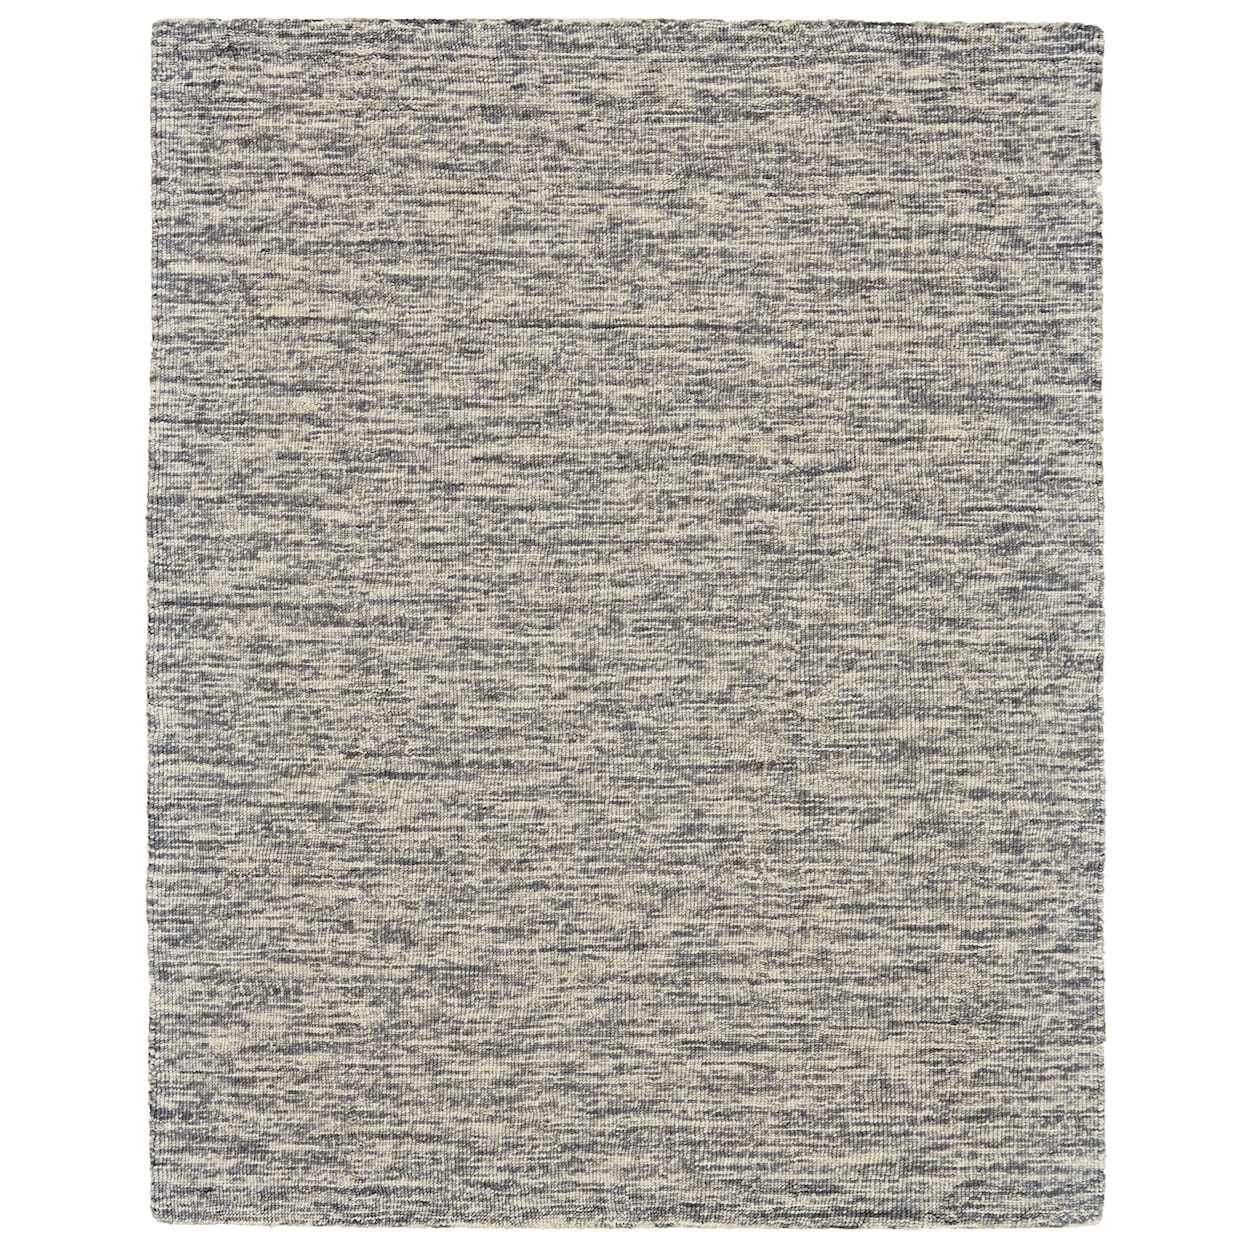 Feizy Rugs Cora Gray 9'-6" x 13'-6" Area Rug